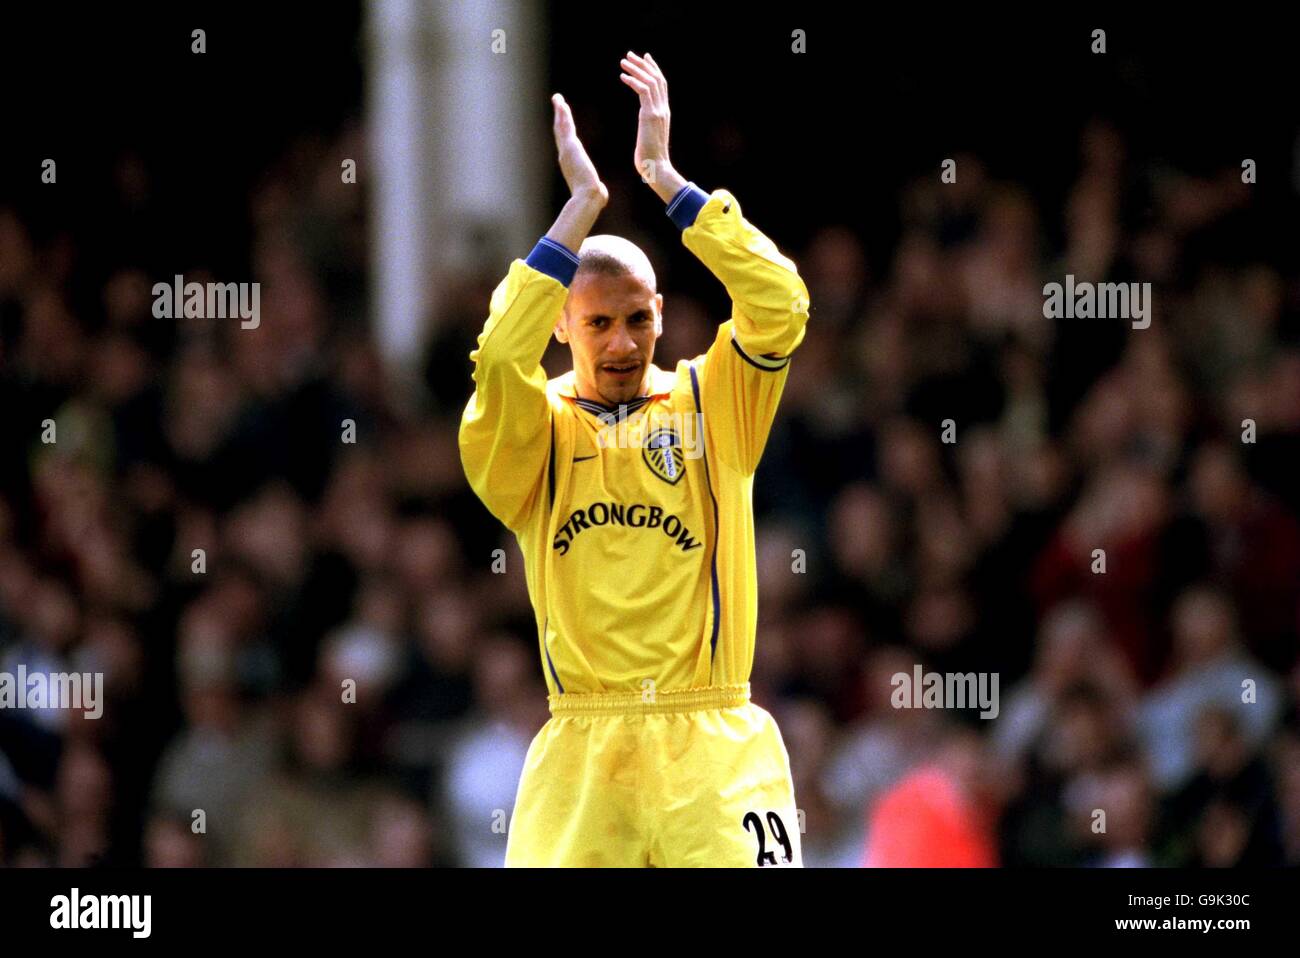 Leeds United S Rio Ferdinand Salutes His Old Fans At The Bobby Moore Stand At Upton Park West Ham Stock Photo Alamy